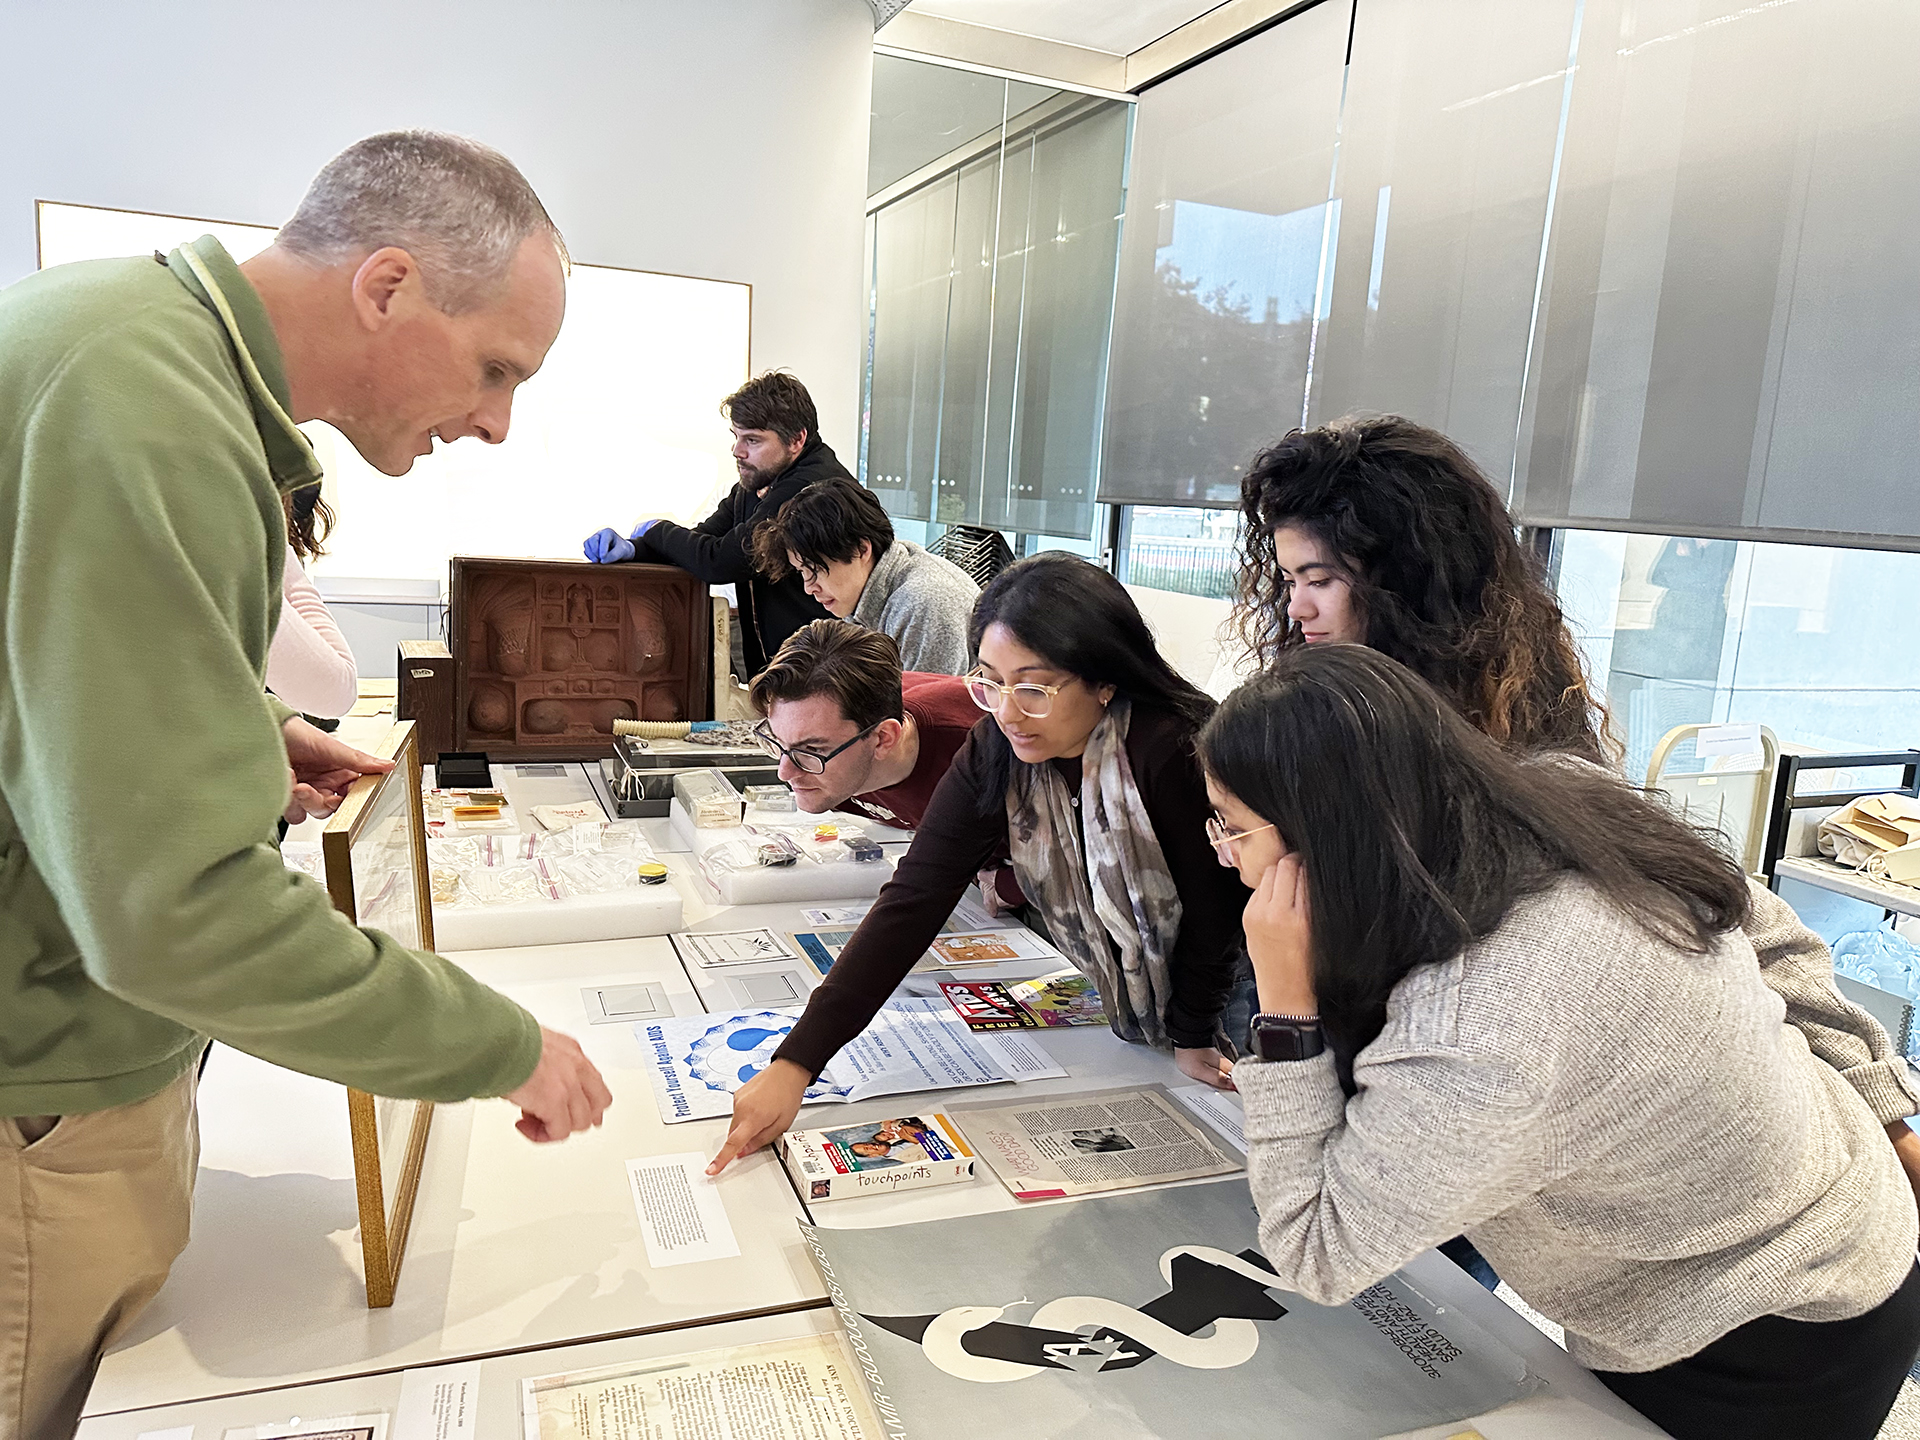 People stand around a table looking at artwork and documents on the table. 